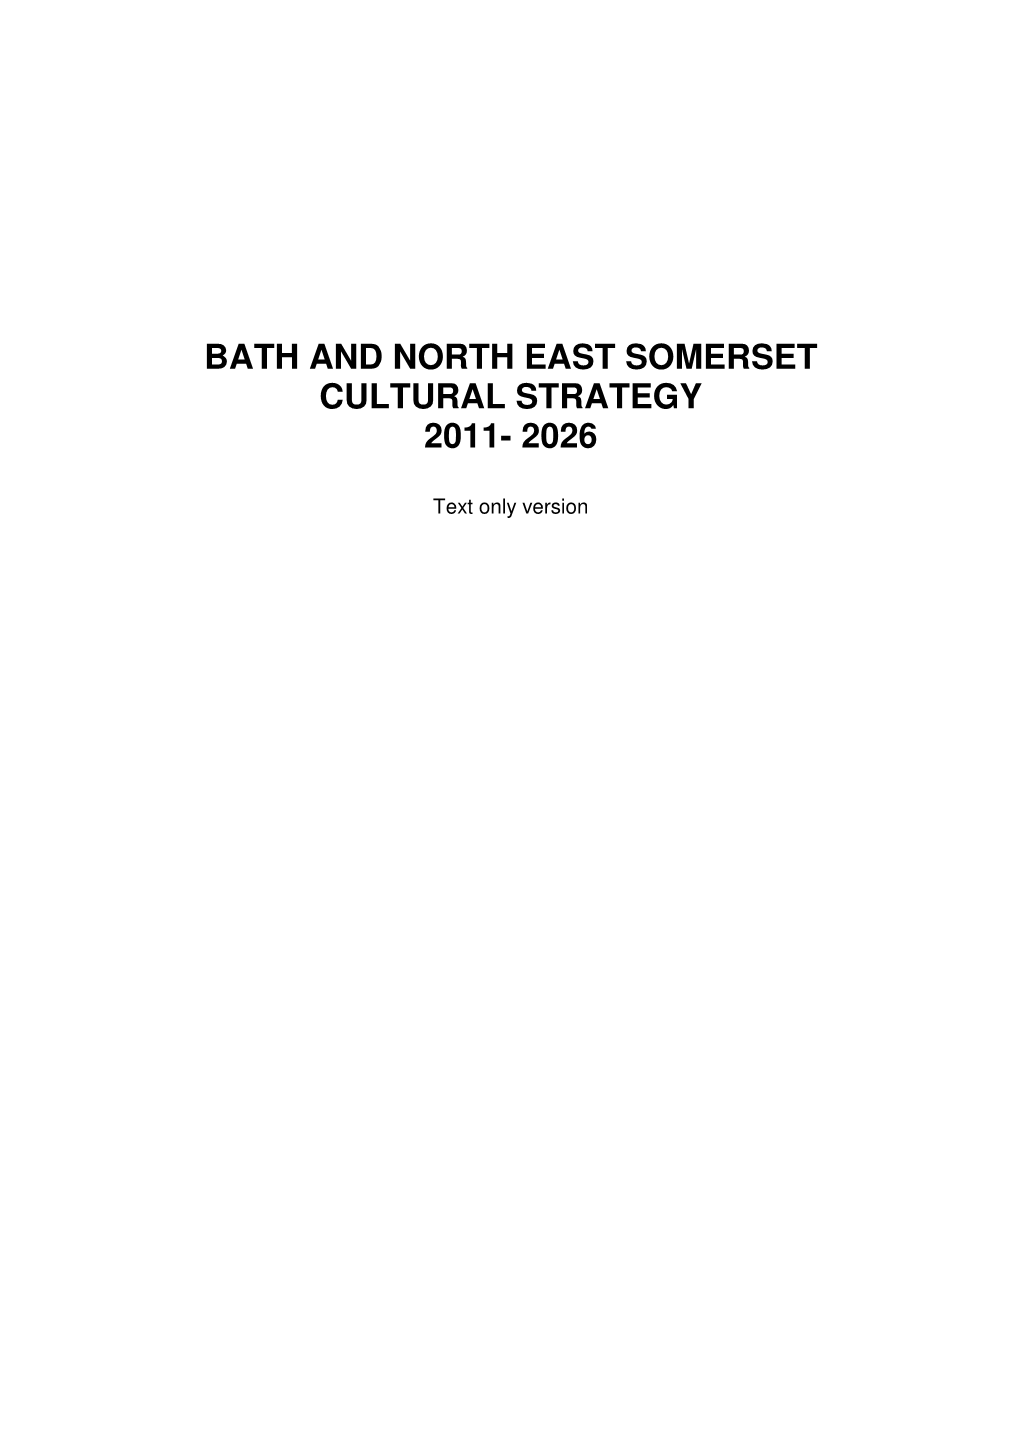 Bath and North East Somerset Cultural Strategy 2011- 2026